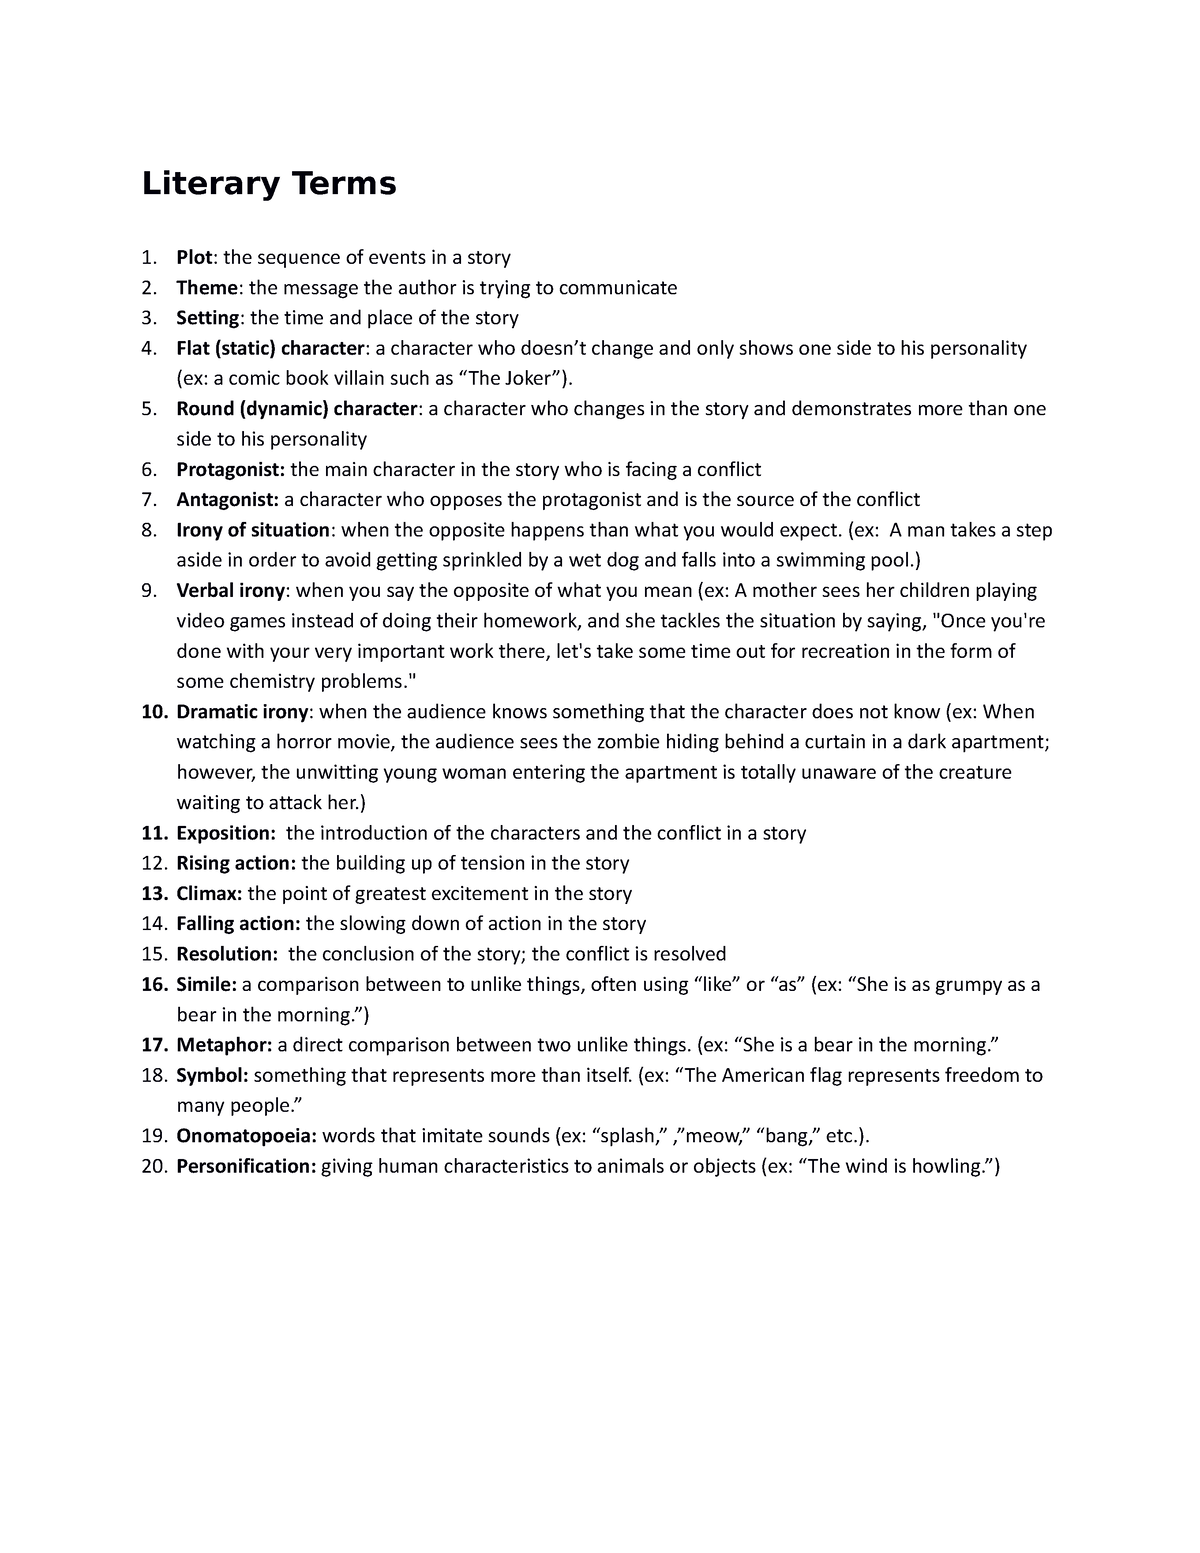 Literary Terms (1)-1 - Literary Terms Plot: the sequence of events in a ...